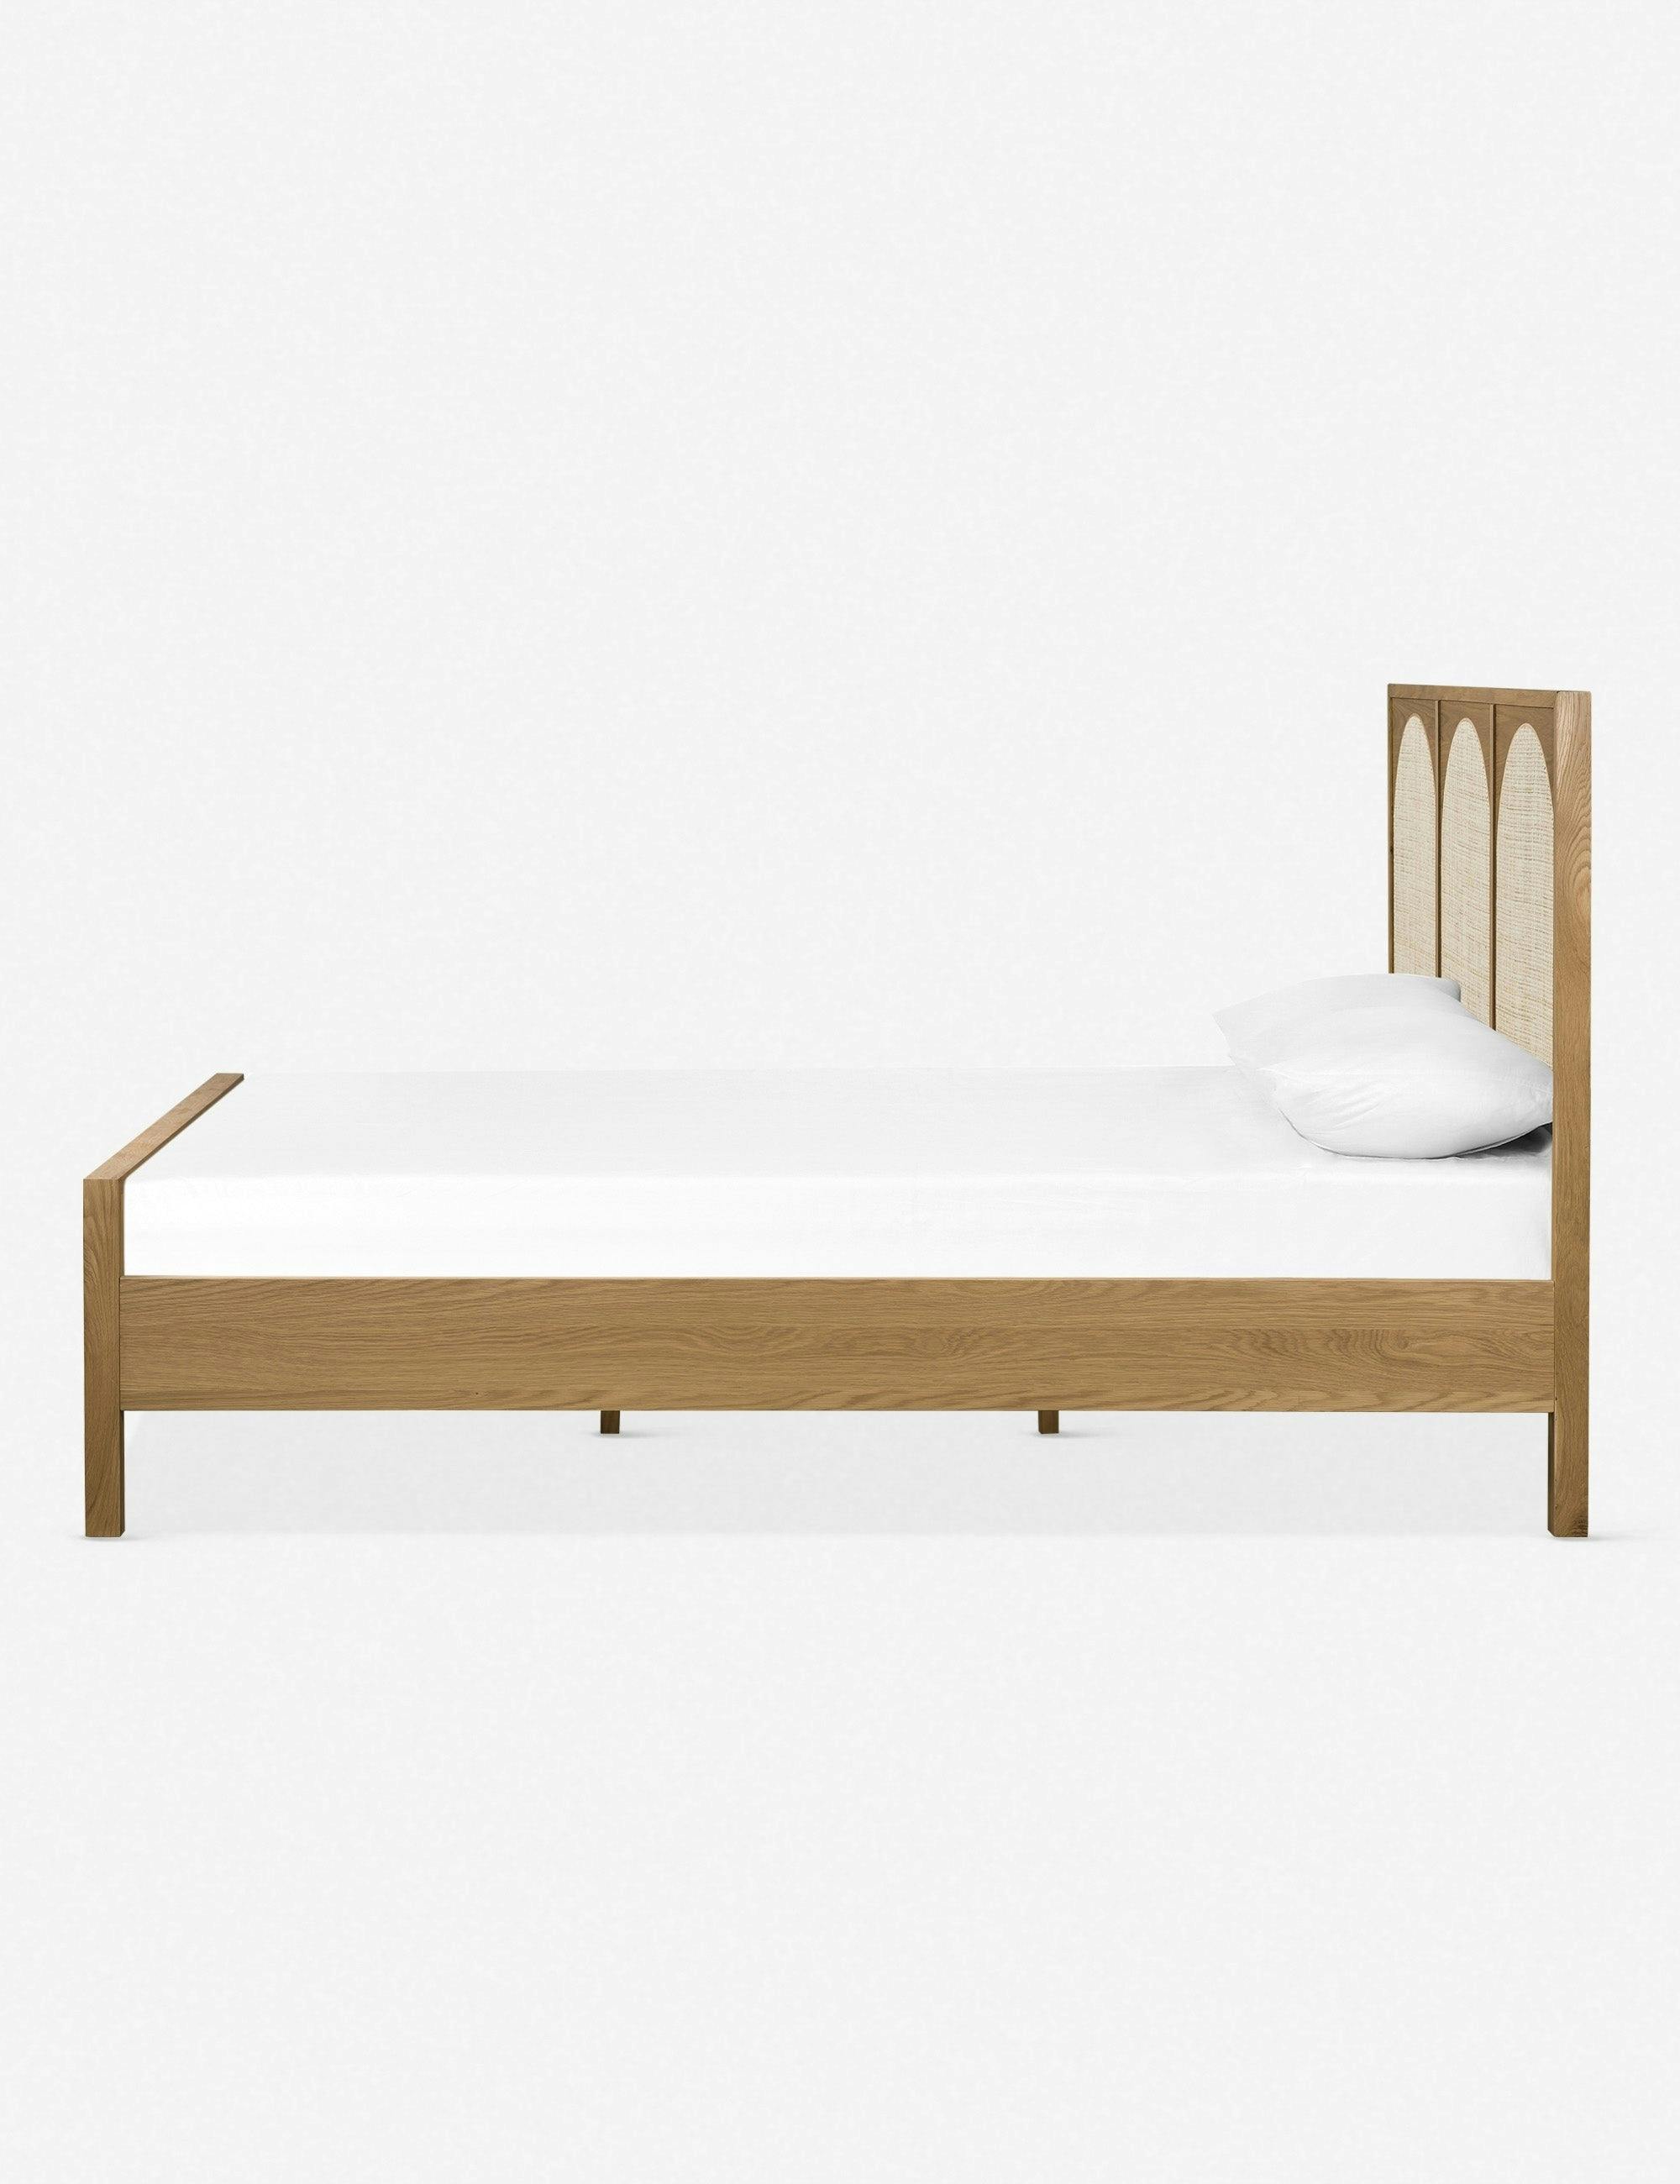 Allegra Contemporary Oak Queen Bed with Upholstered Headboard